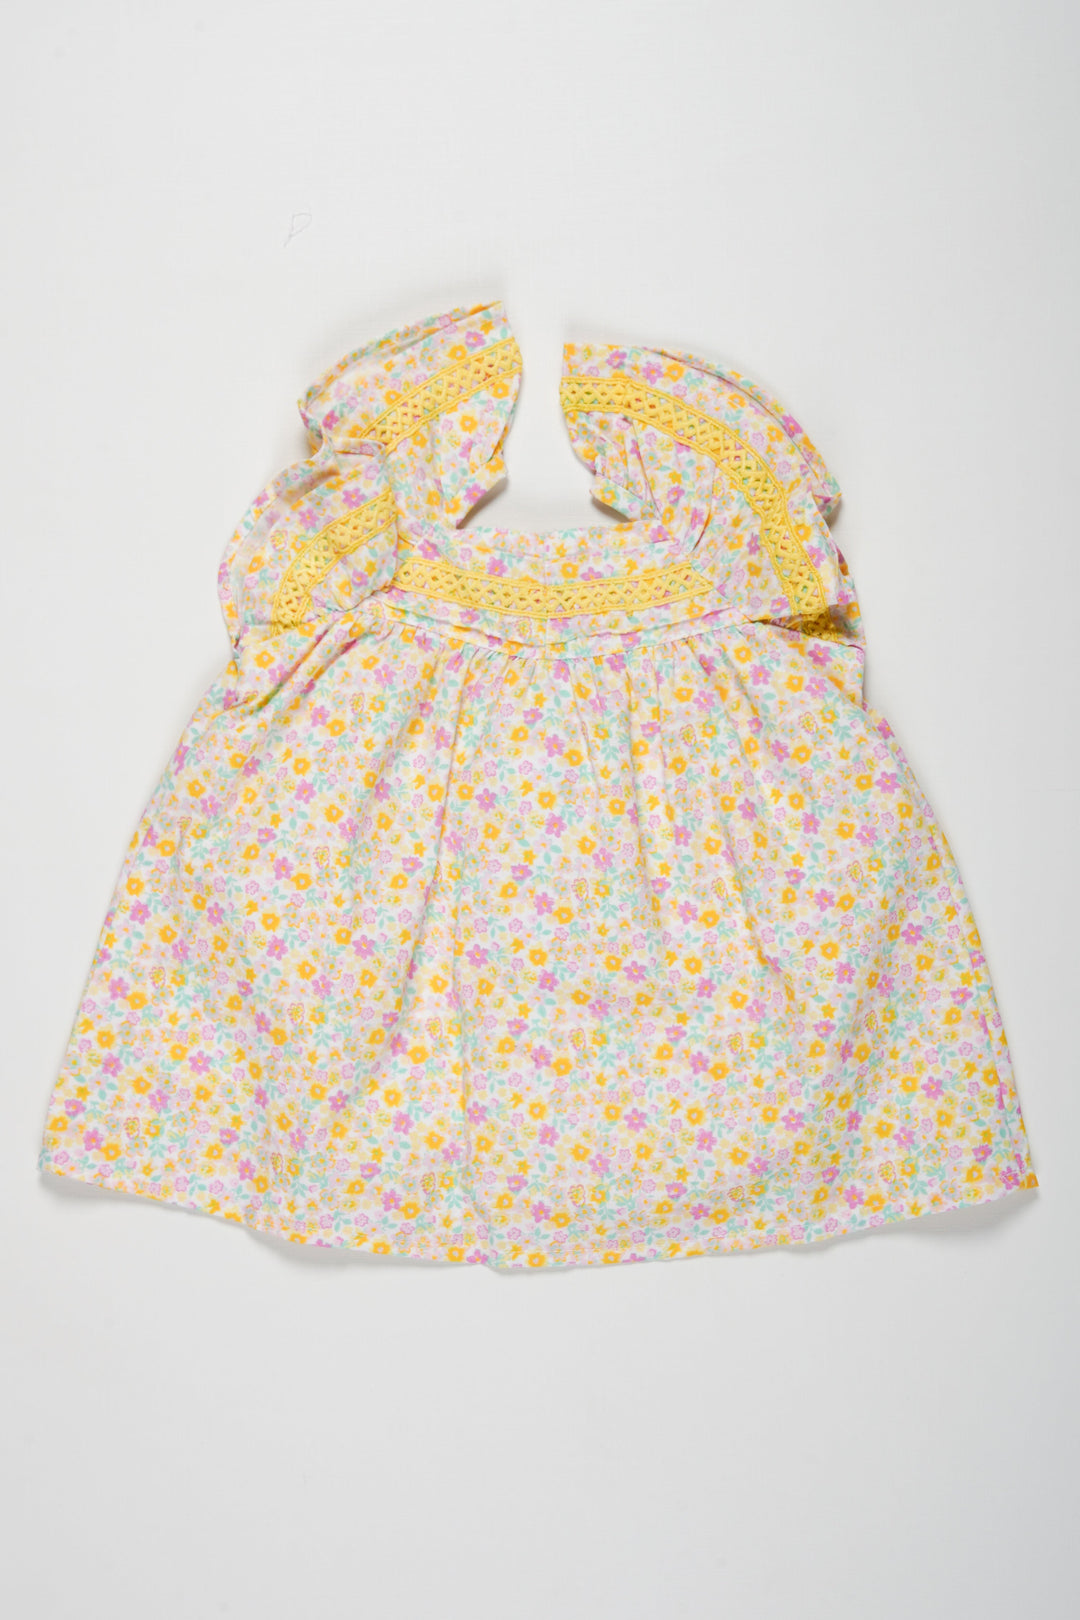 The Nesavu Baby Cotton Frocks Charming Floral Cotton Frock for Baby Girls Nesavu 14 (6M) / Yellow / Cotton BFJ558B-14 Buy Baby Girl Floral Cotton Dress Online | Trendy and Comfortable Baby Wear | The Nesavu